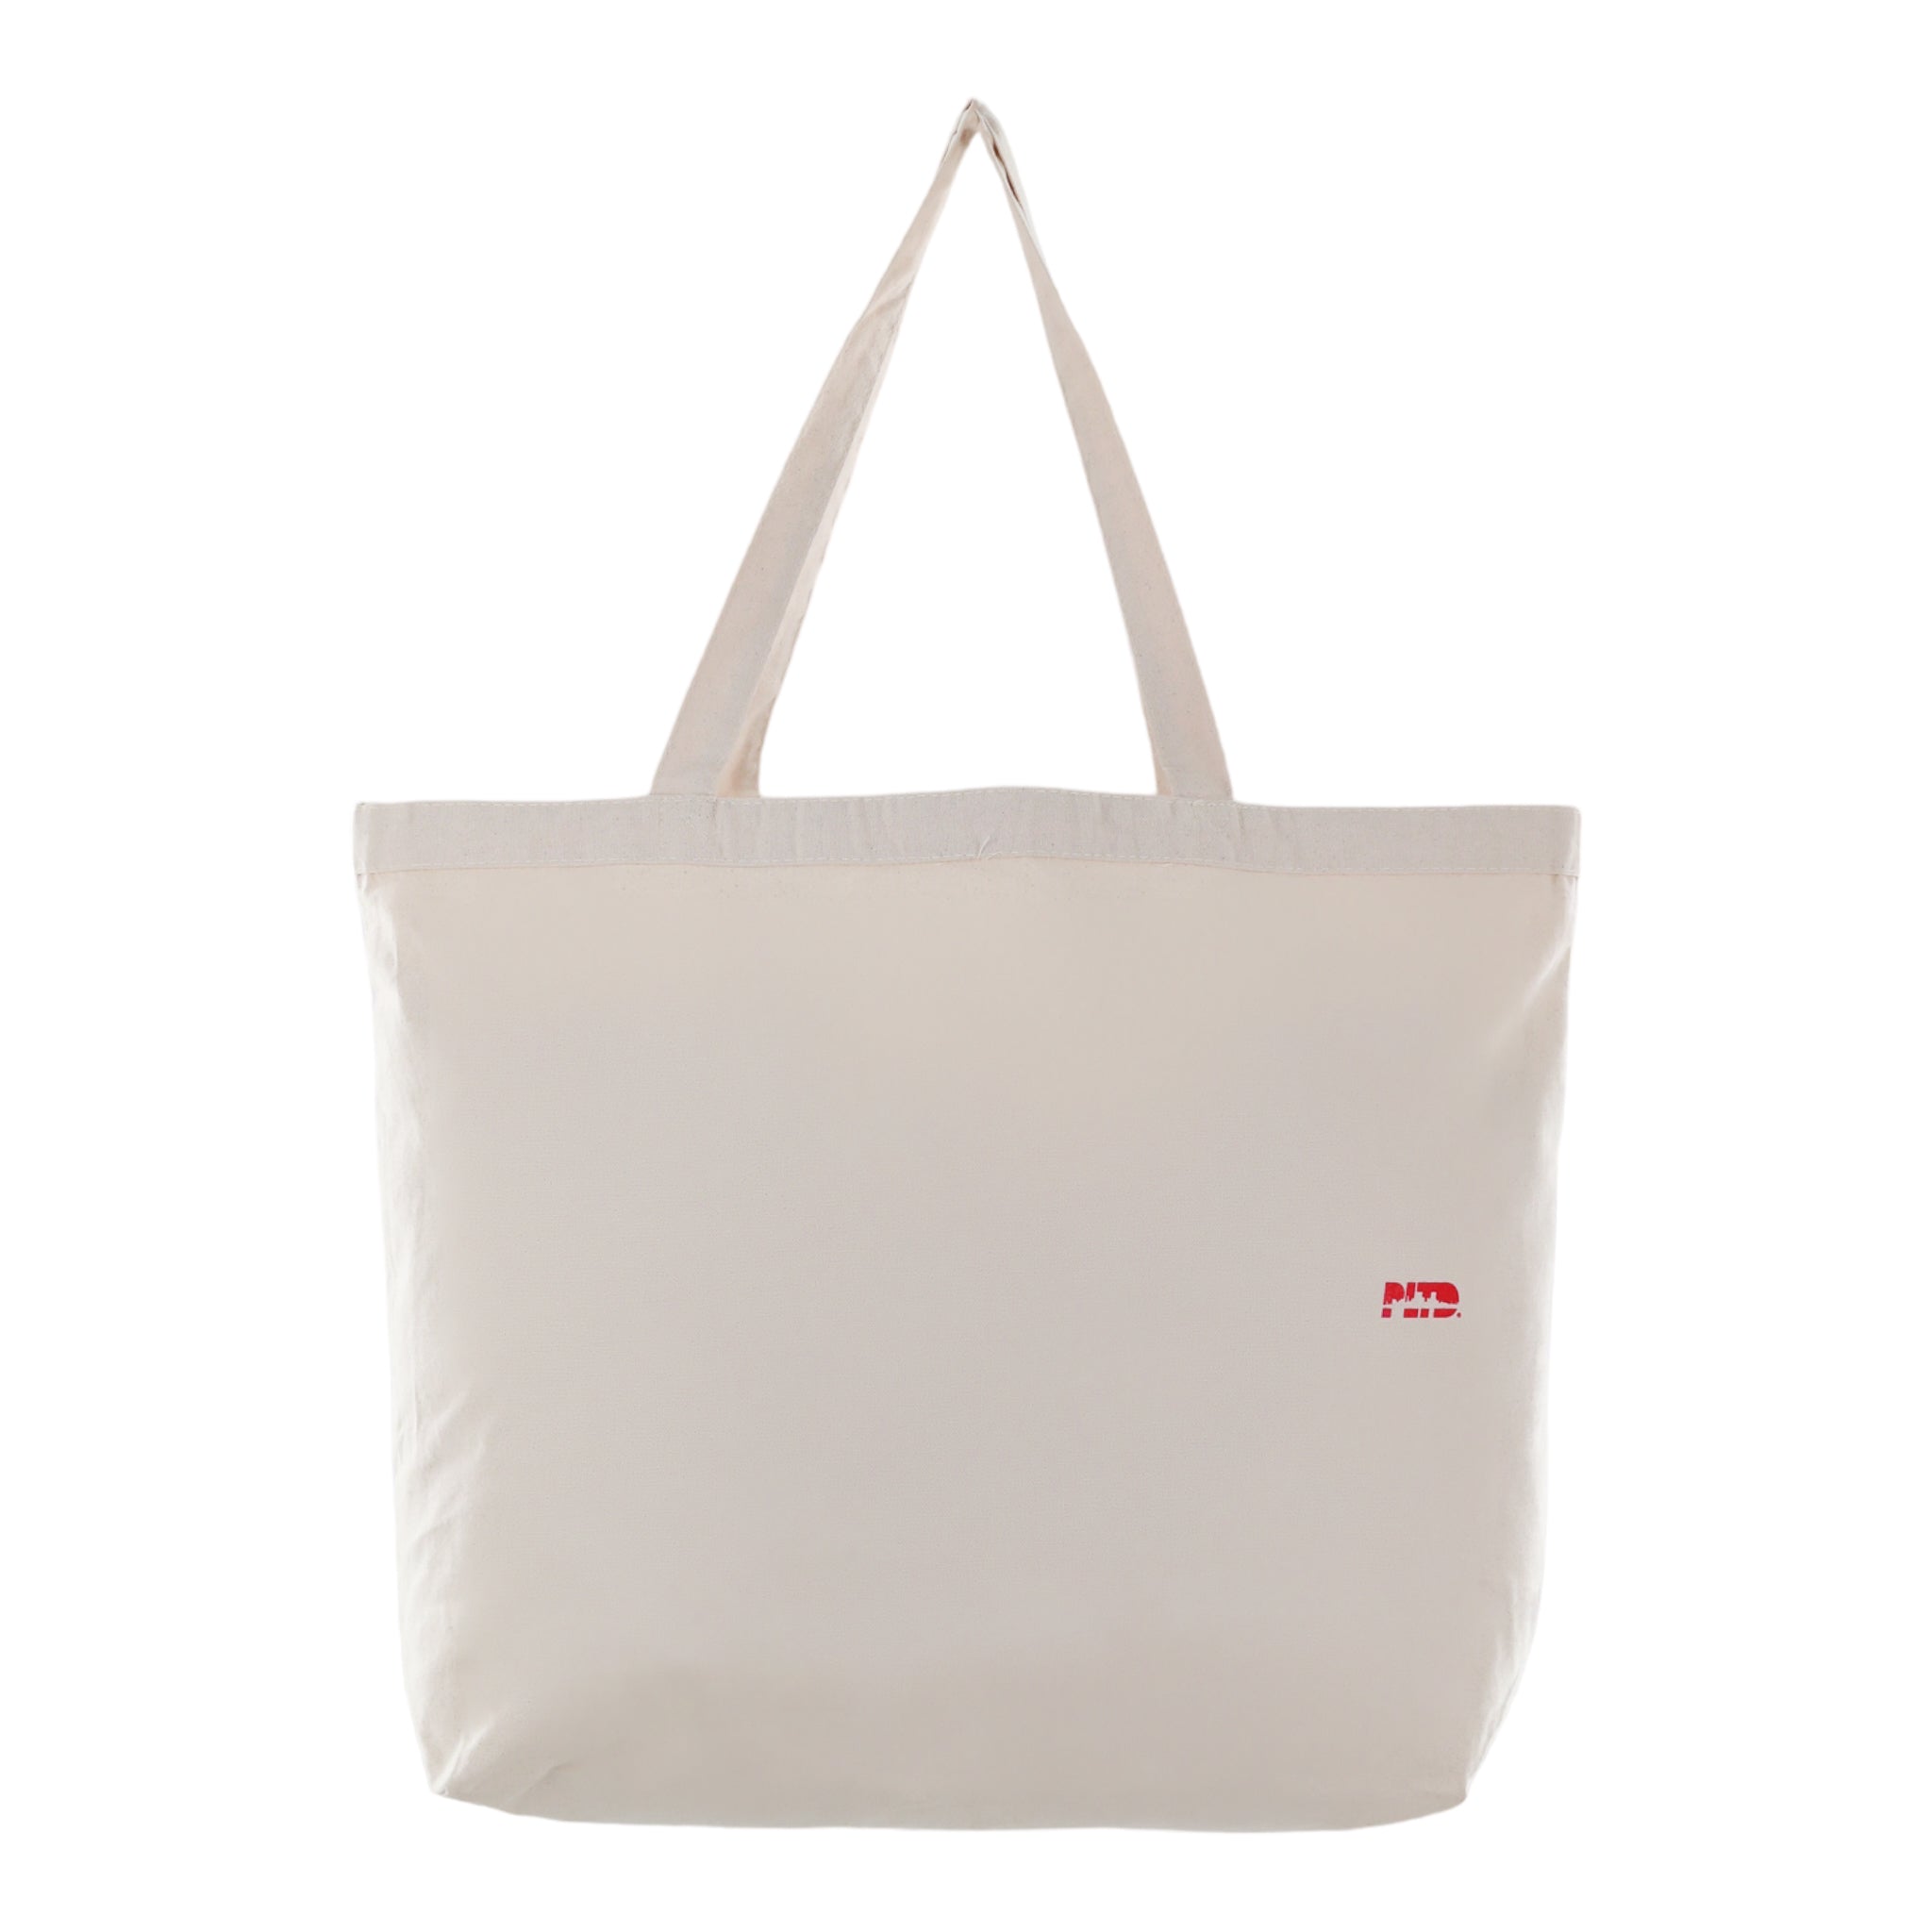 Stay Out of Uptown - Natural Canvas Tote Bag